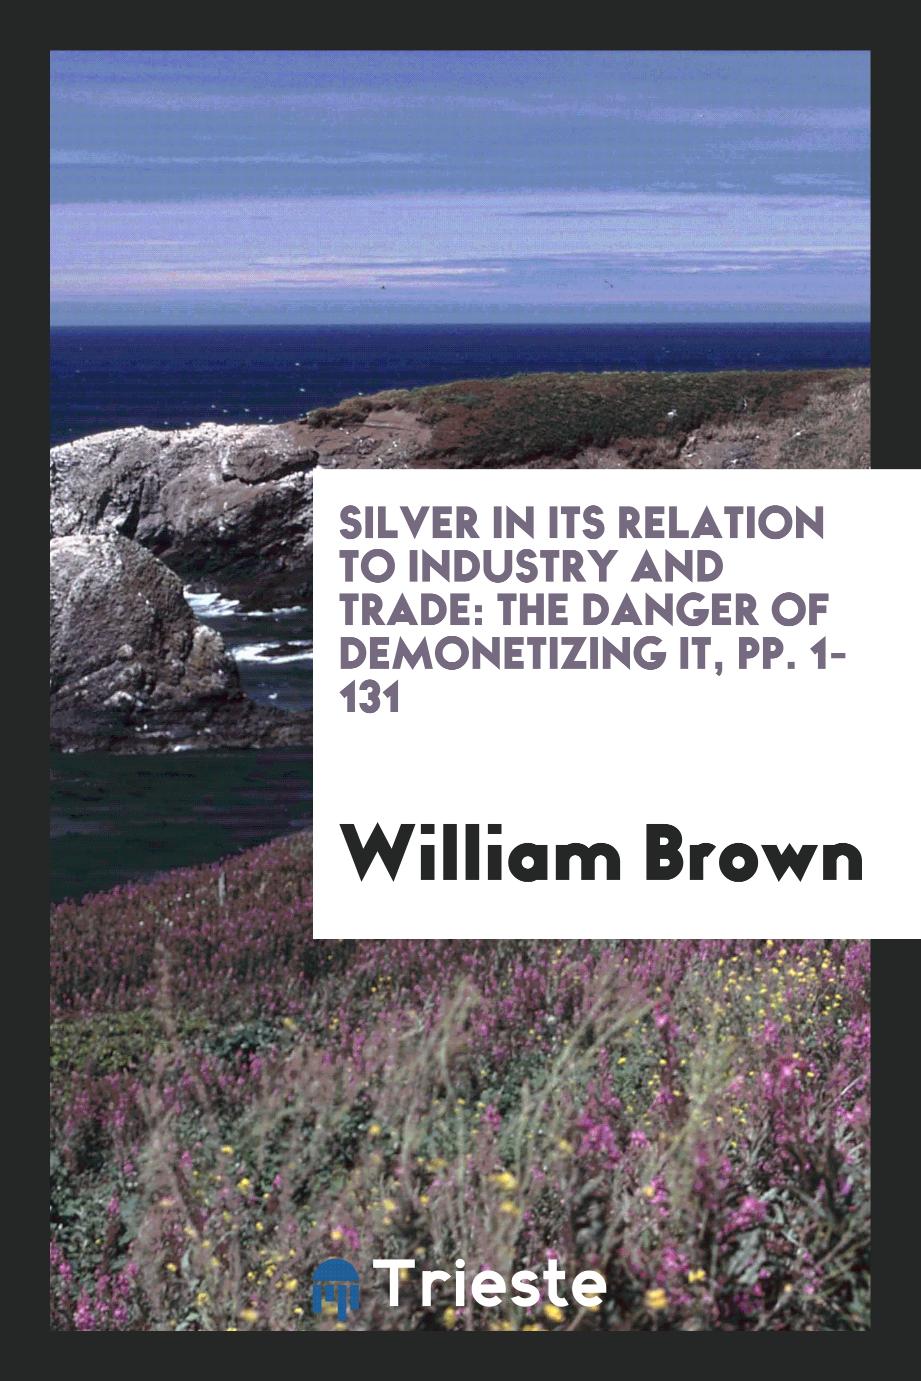 Silver in Its Relation to Industry and Trade: The Danger of Demonetizing It, pp. 1-131